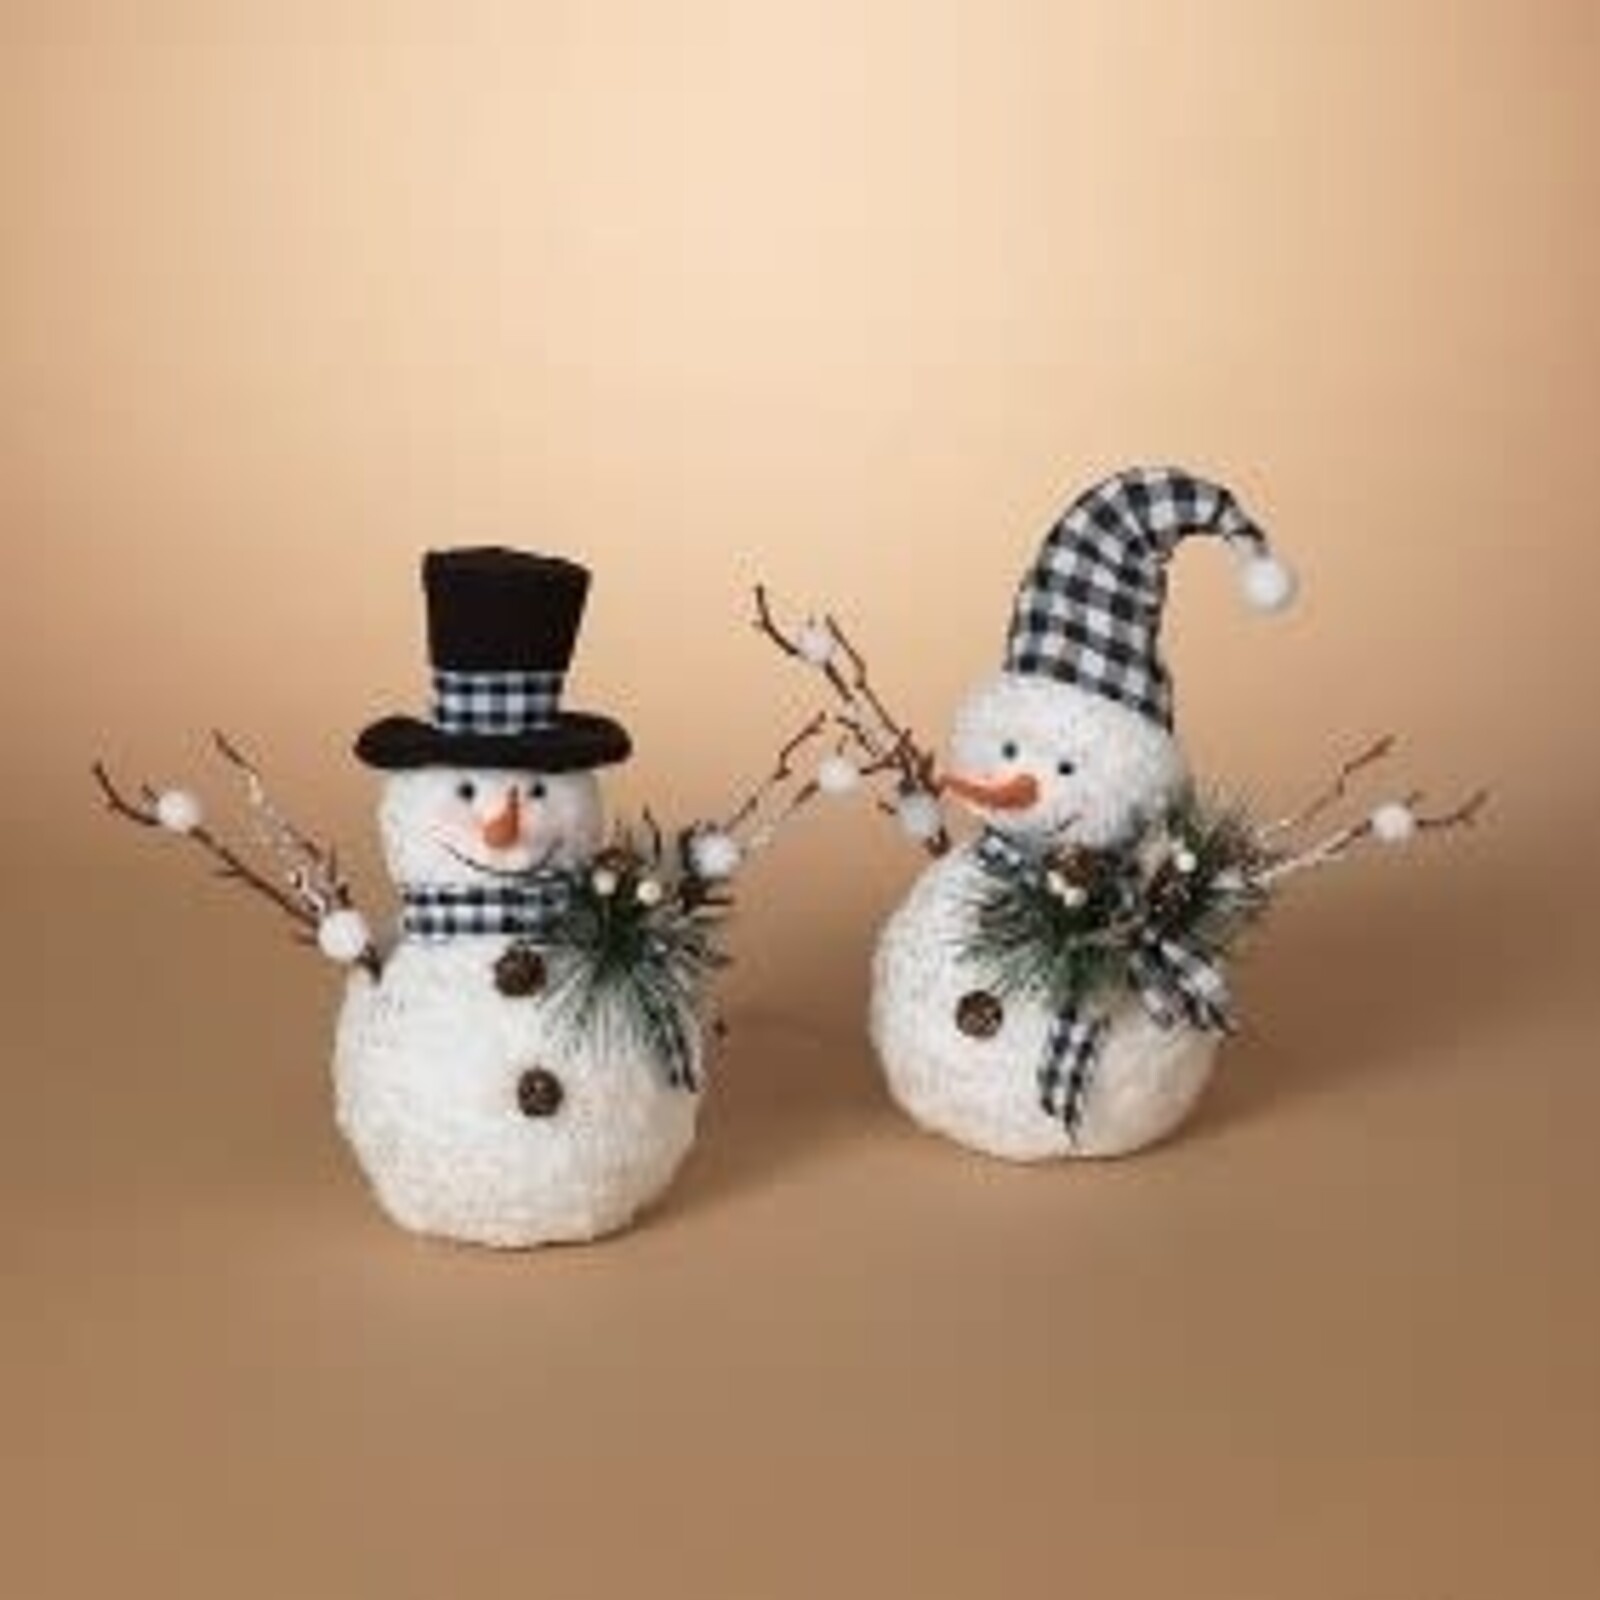 Gerson 11.4" Snowman with Floral Accent  2593430 loading=